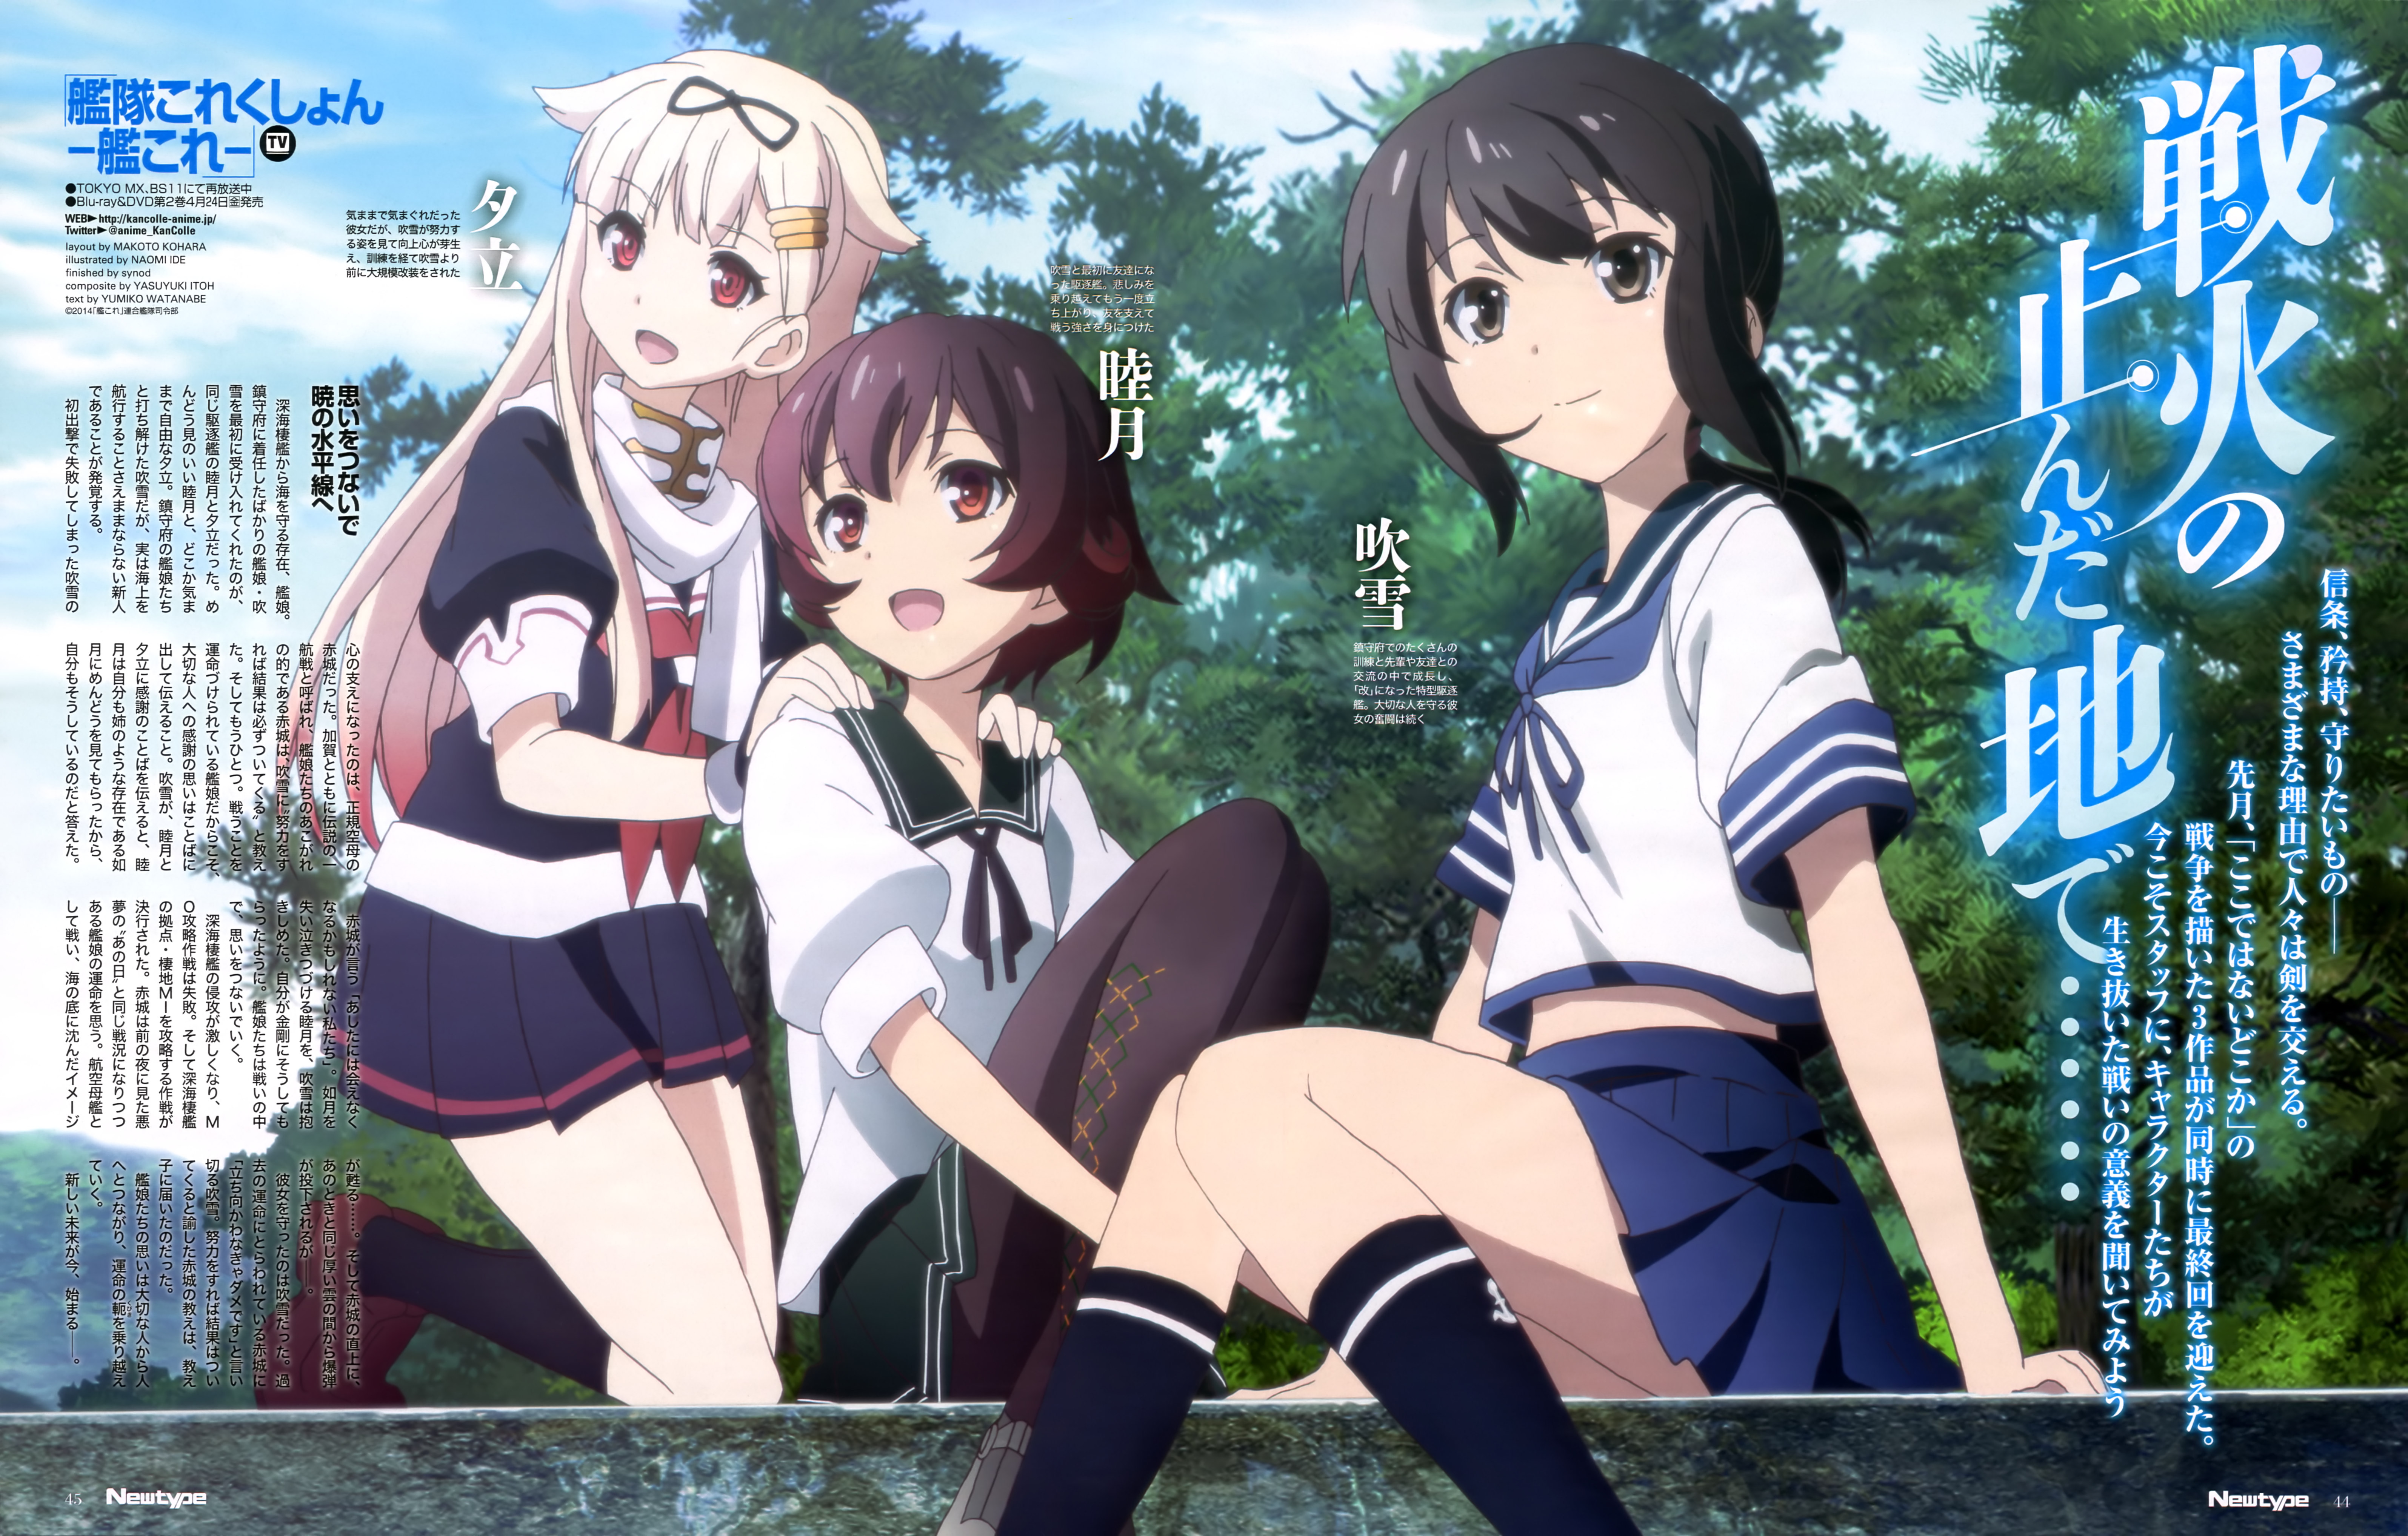 Top 10 Anime Series from NewType’s May 2015 Issue Kantai Collection